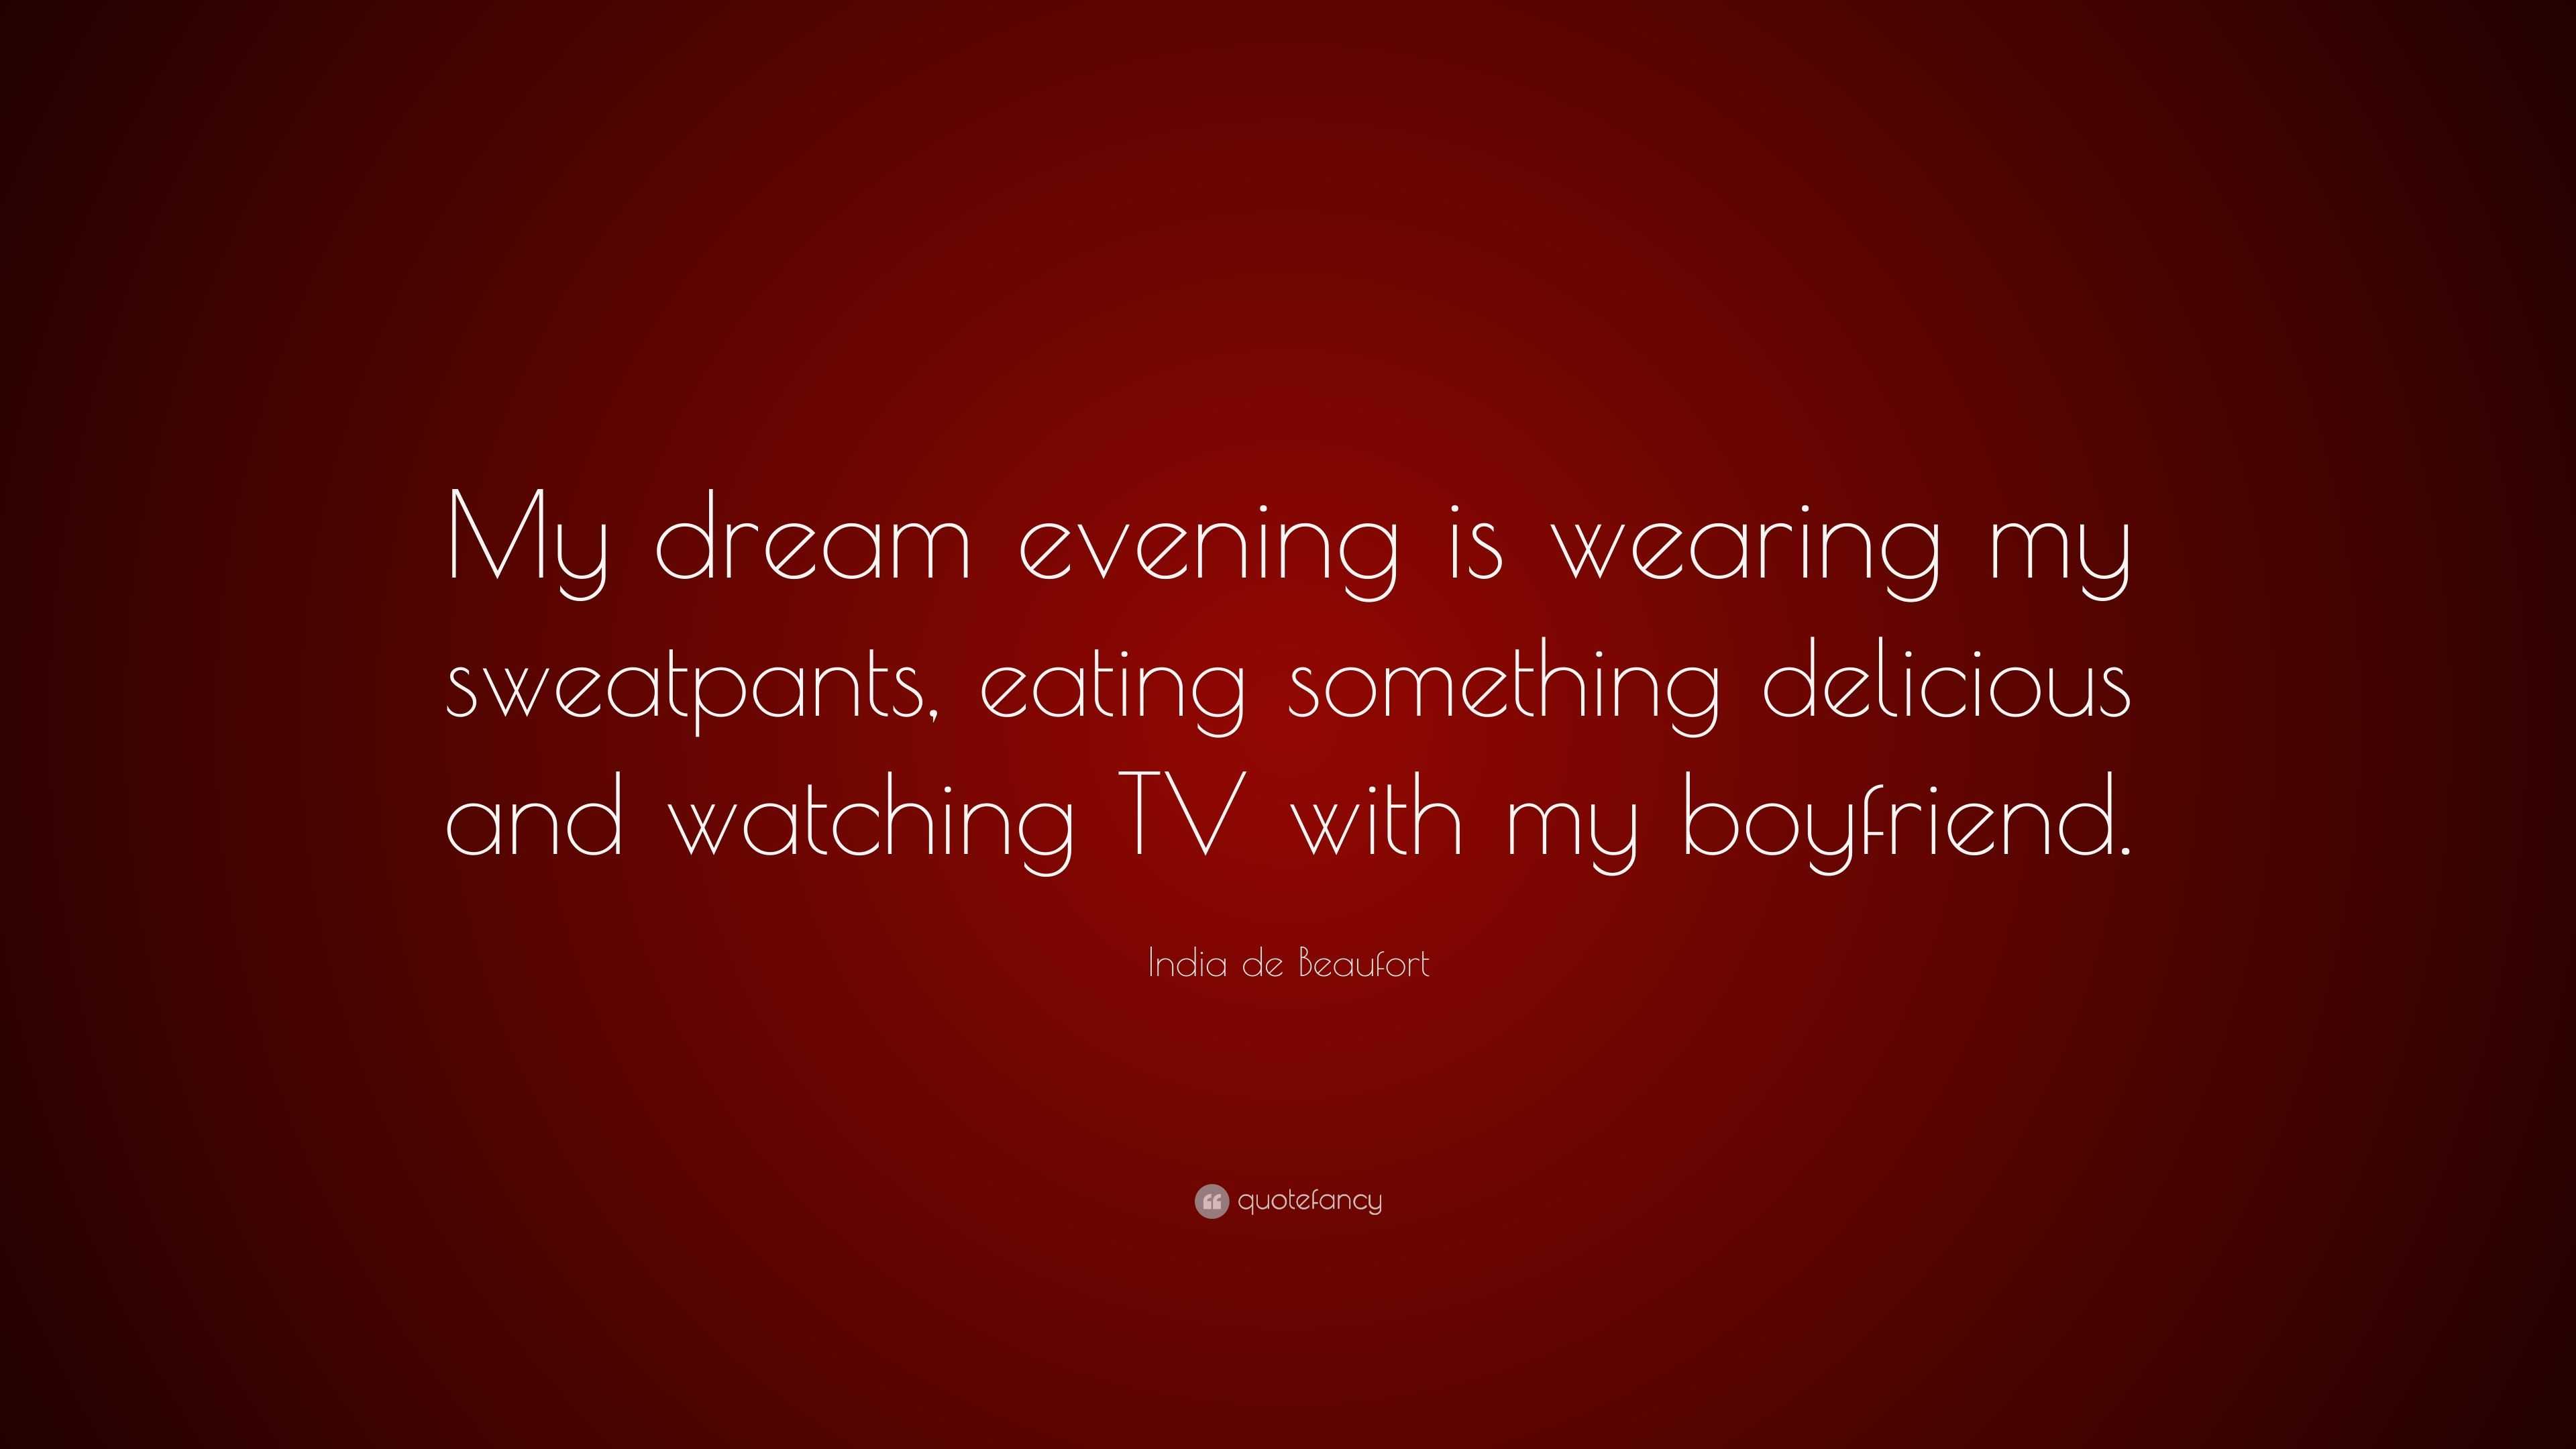 India de Beaufort Quote: “My dream evening is wearing my sweatpants, eating  something delicious and watching